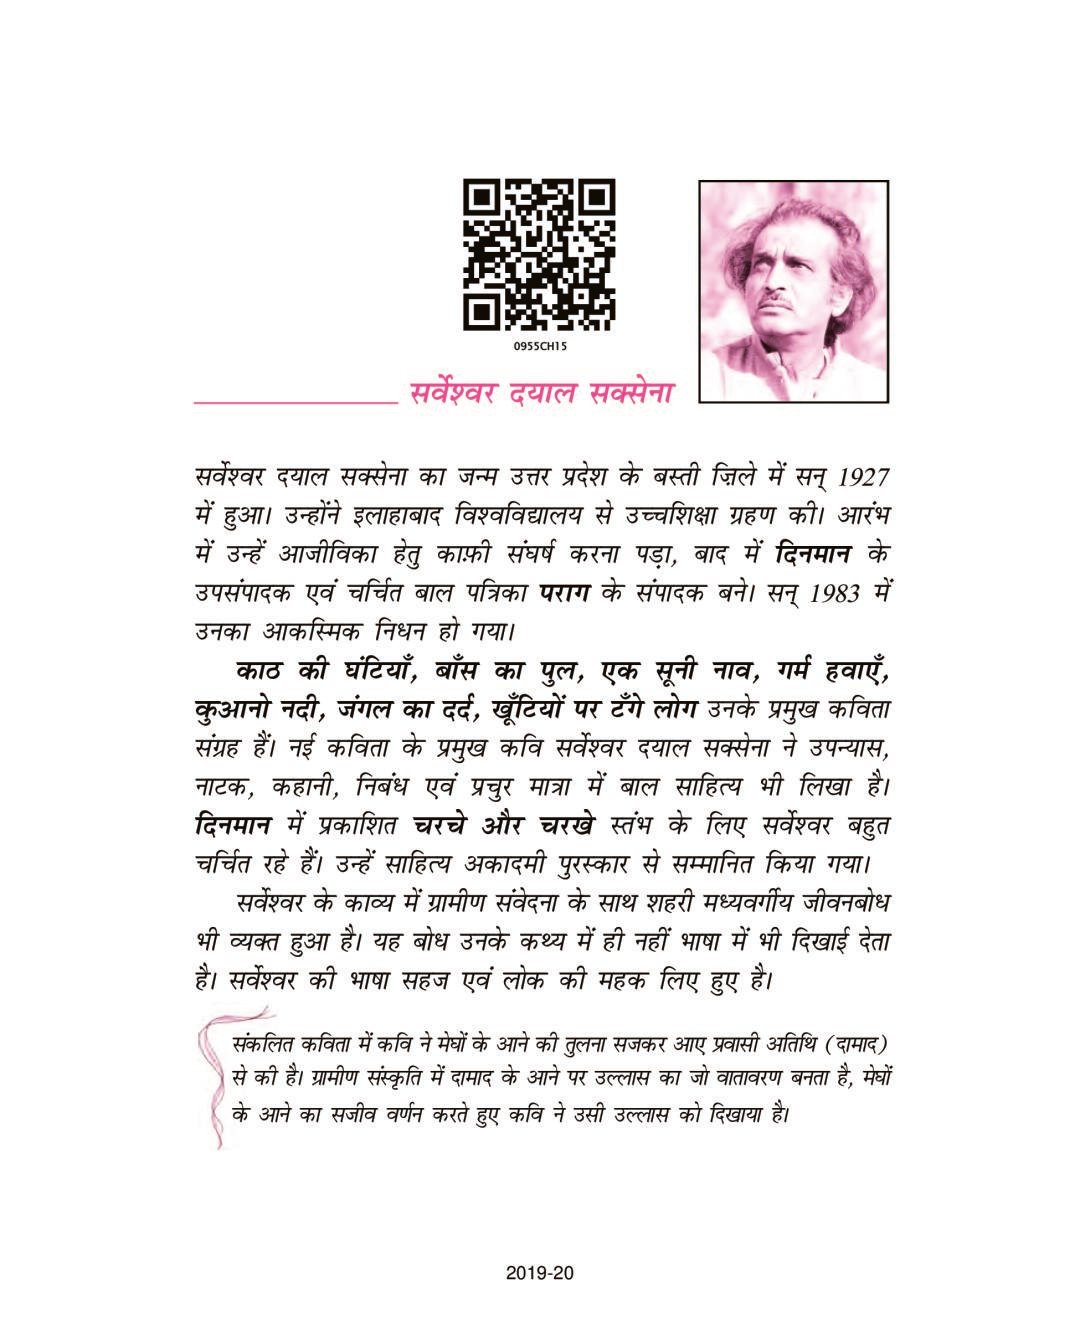 NCERT Book Class 9 Hindi (क्षितिज) Chapter 15 मेघ आए - Page 1